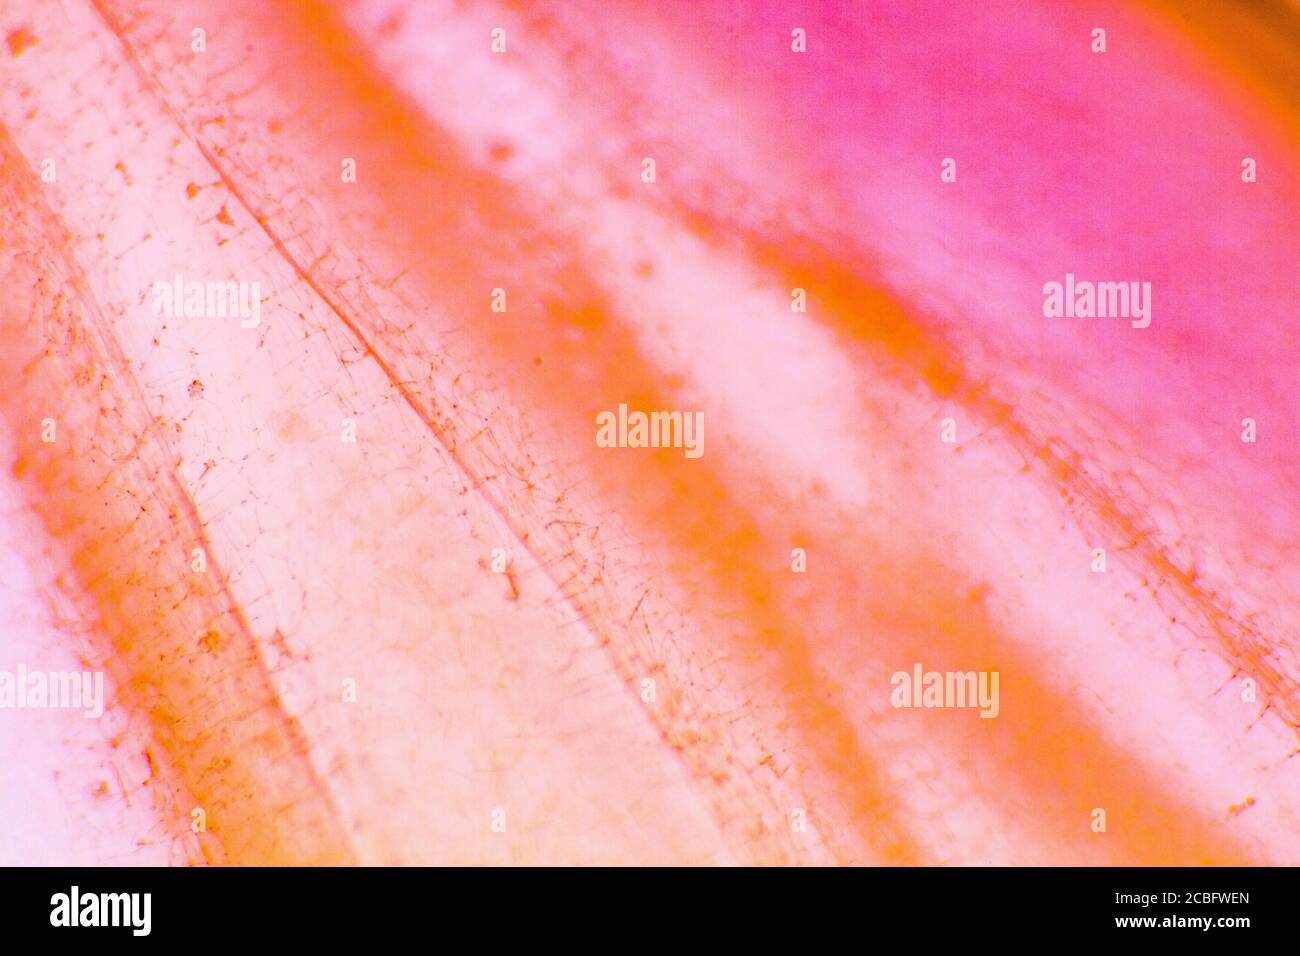 Pigmented large onion cells. Clear epidermal cells of an onion. Suitable as abstact background. Stock Photo